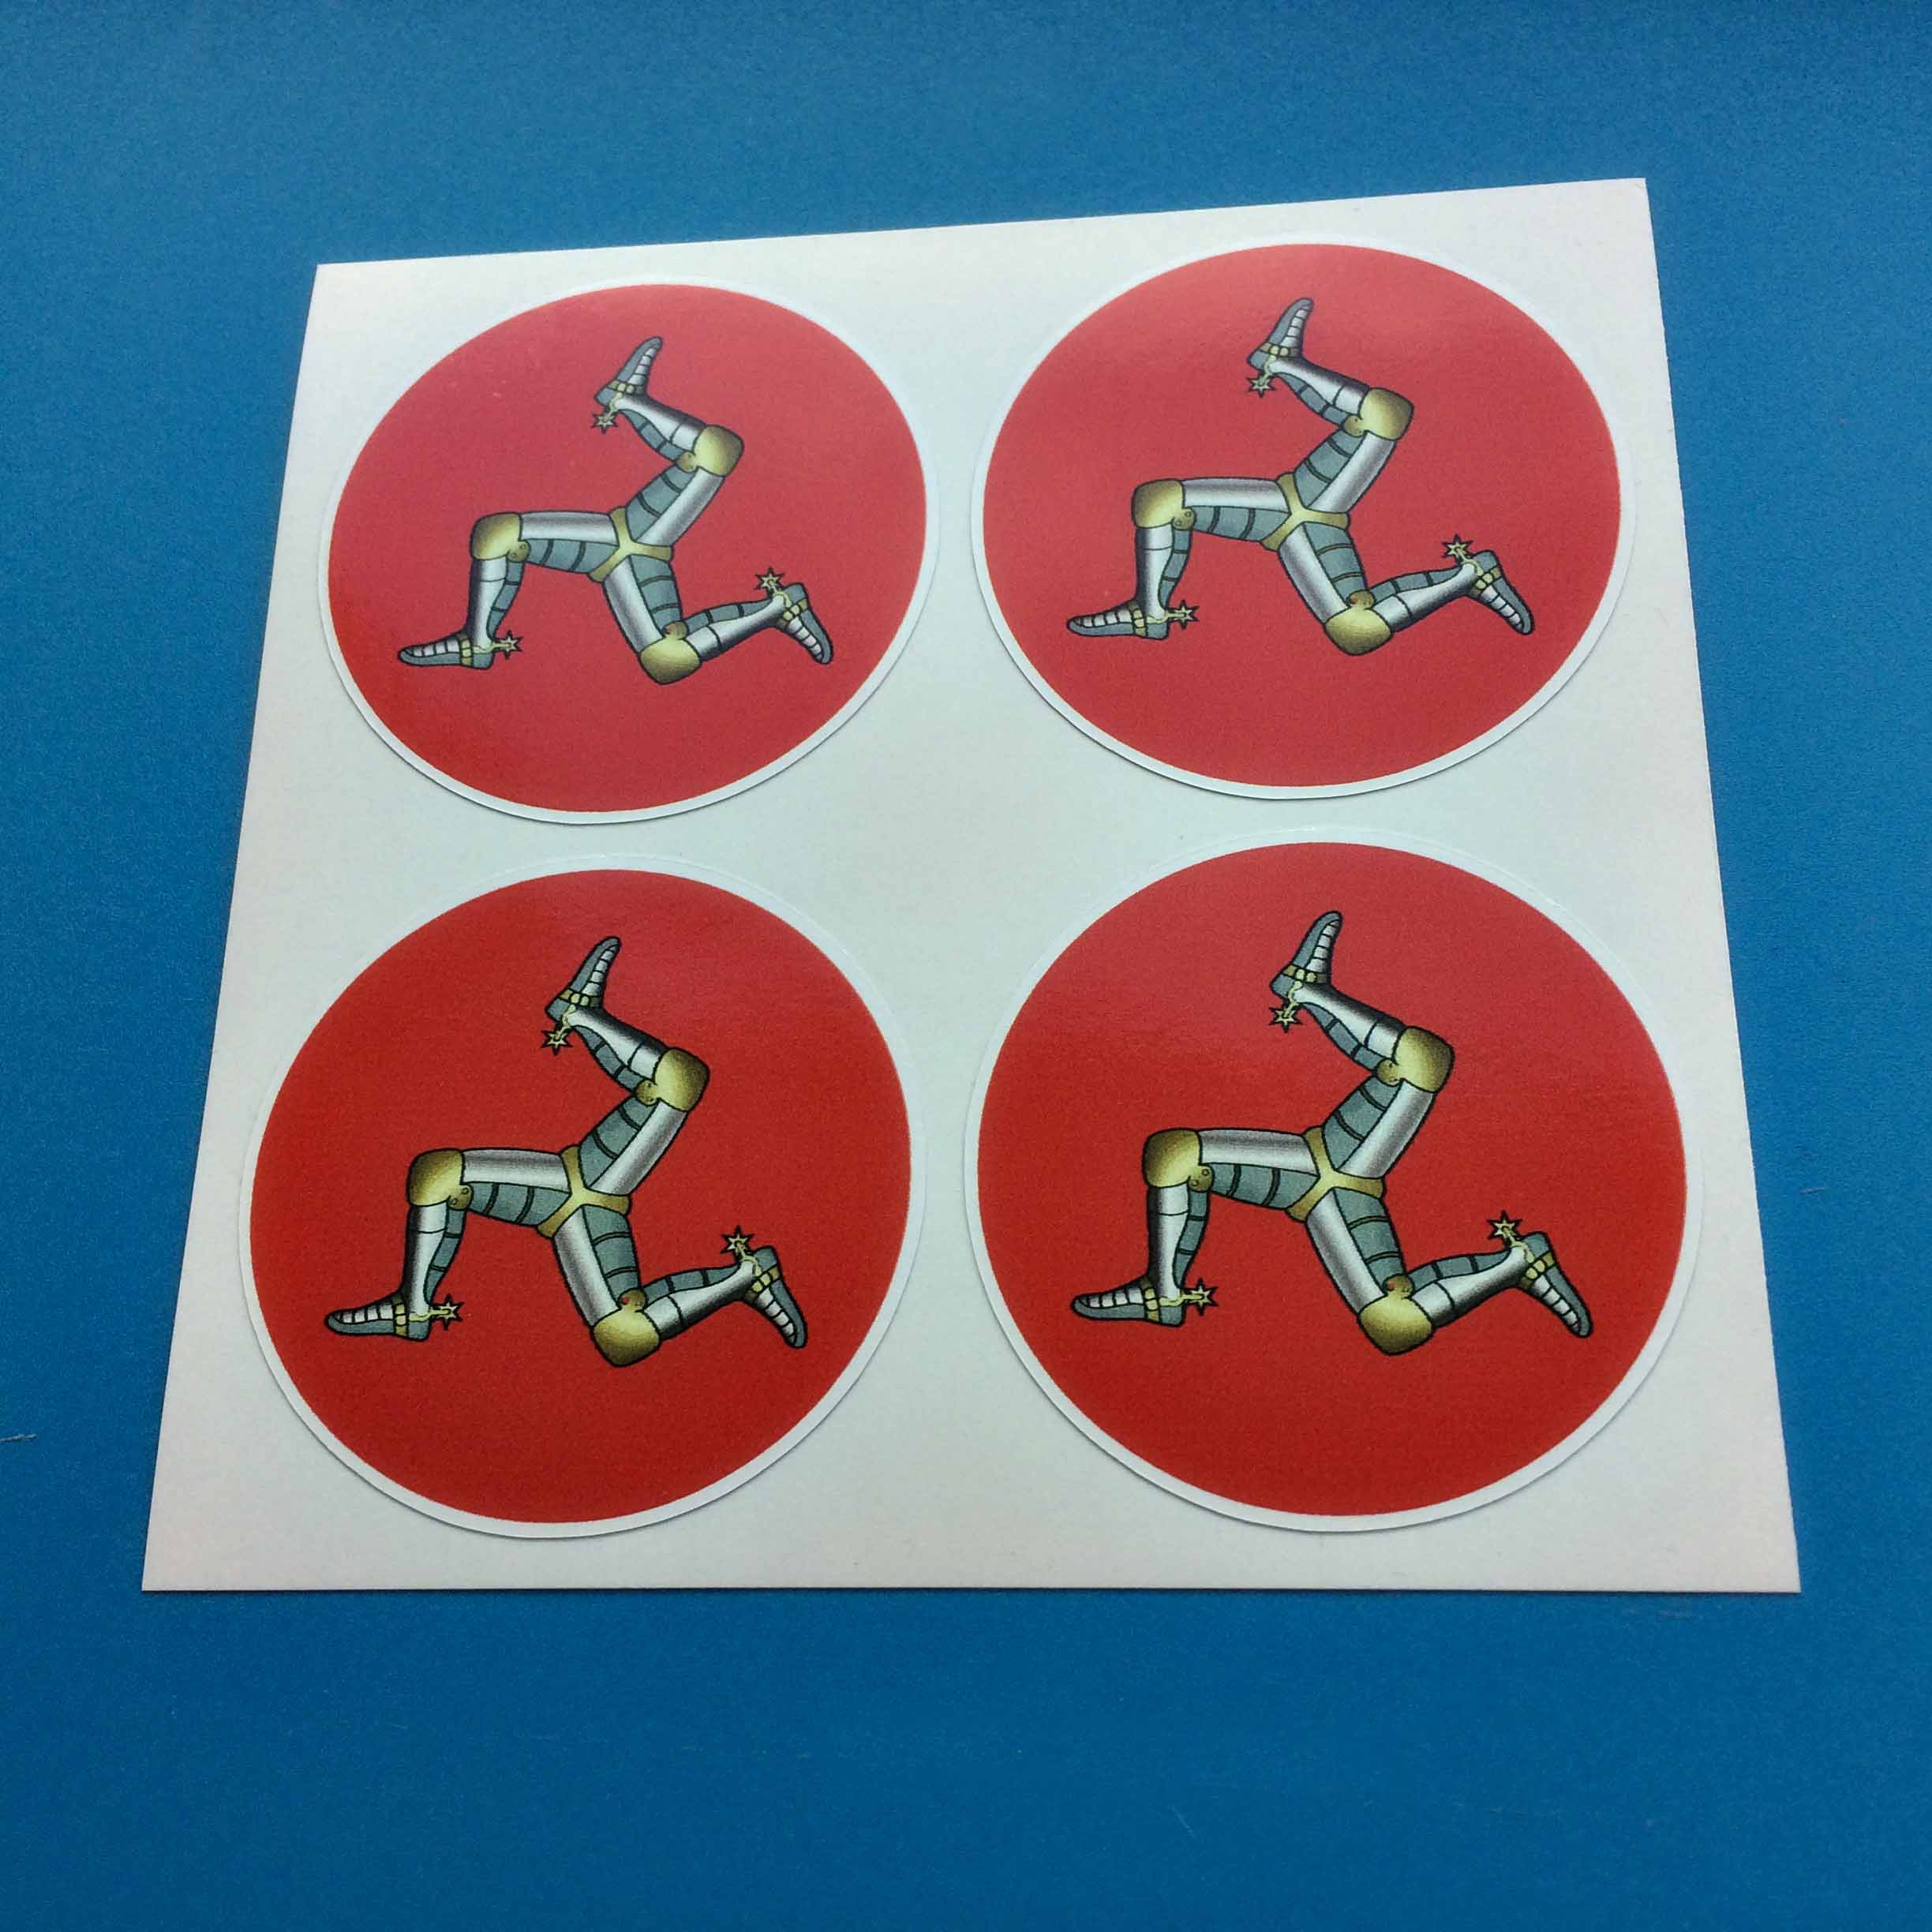 ISLE OF MAN WHEEL CENTRE STICKERS. Three armoured legs with golden spurs on a red circular background.